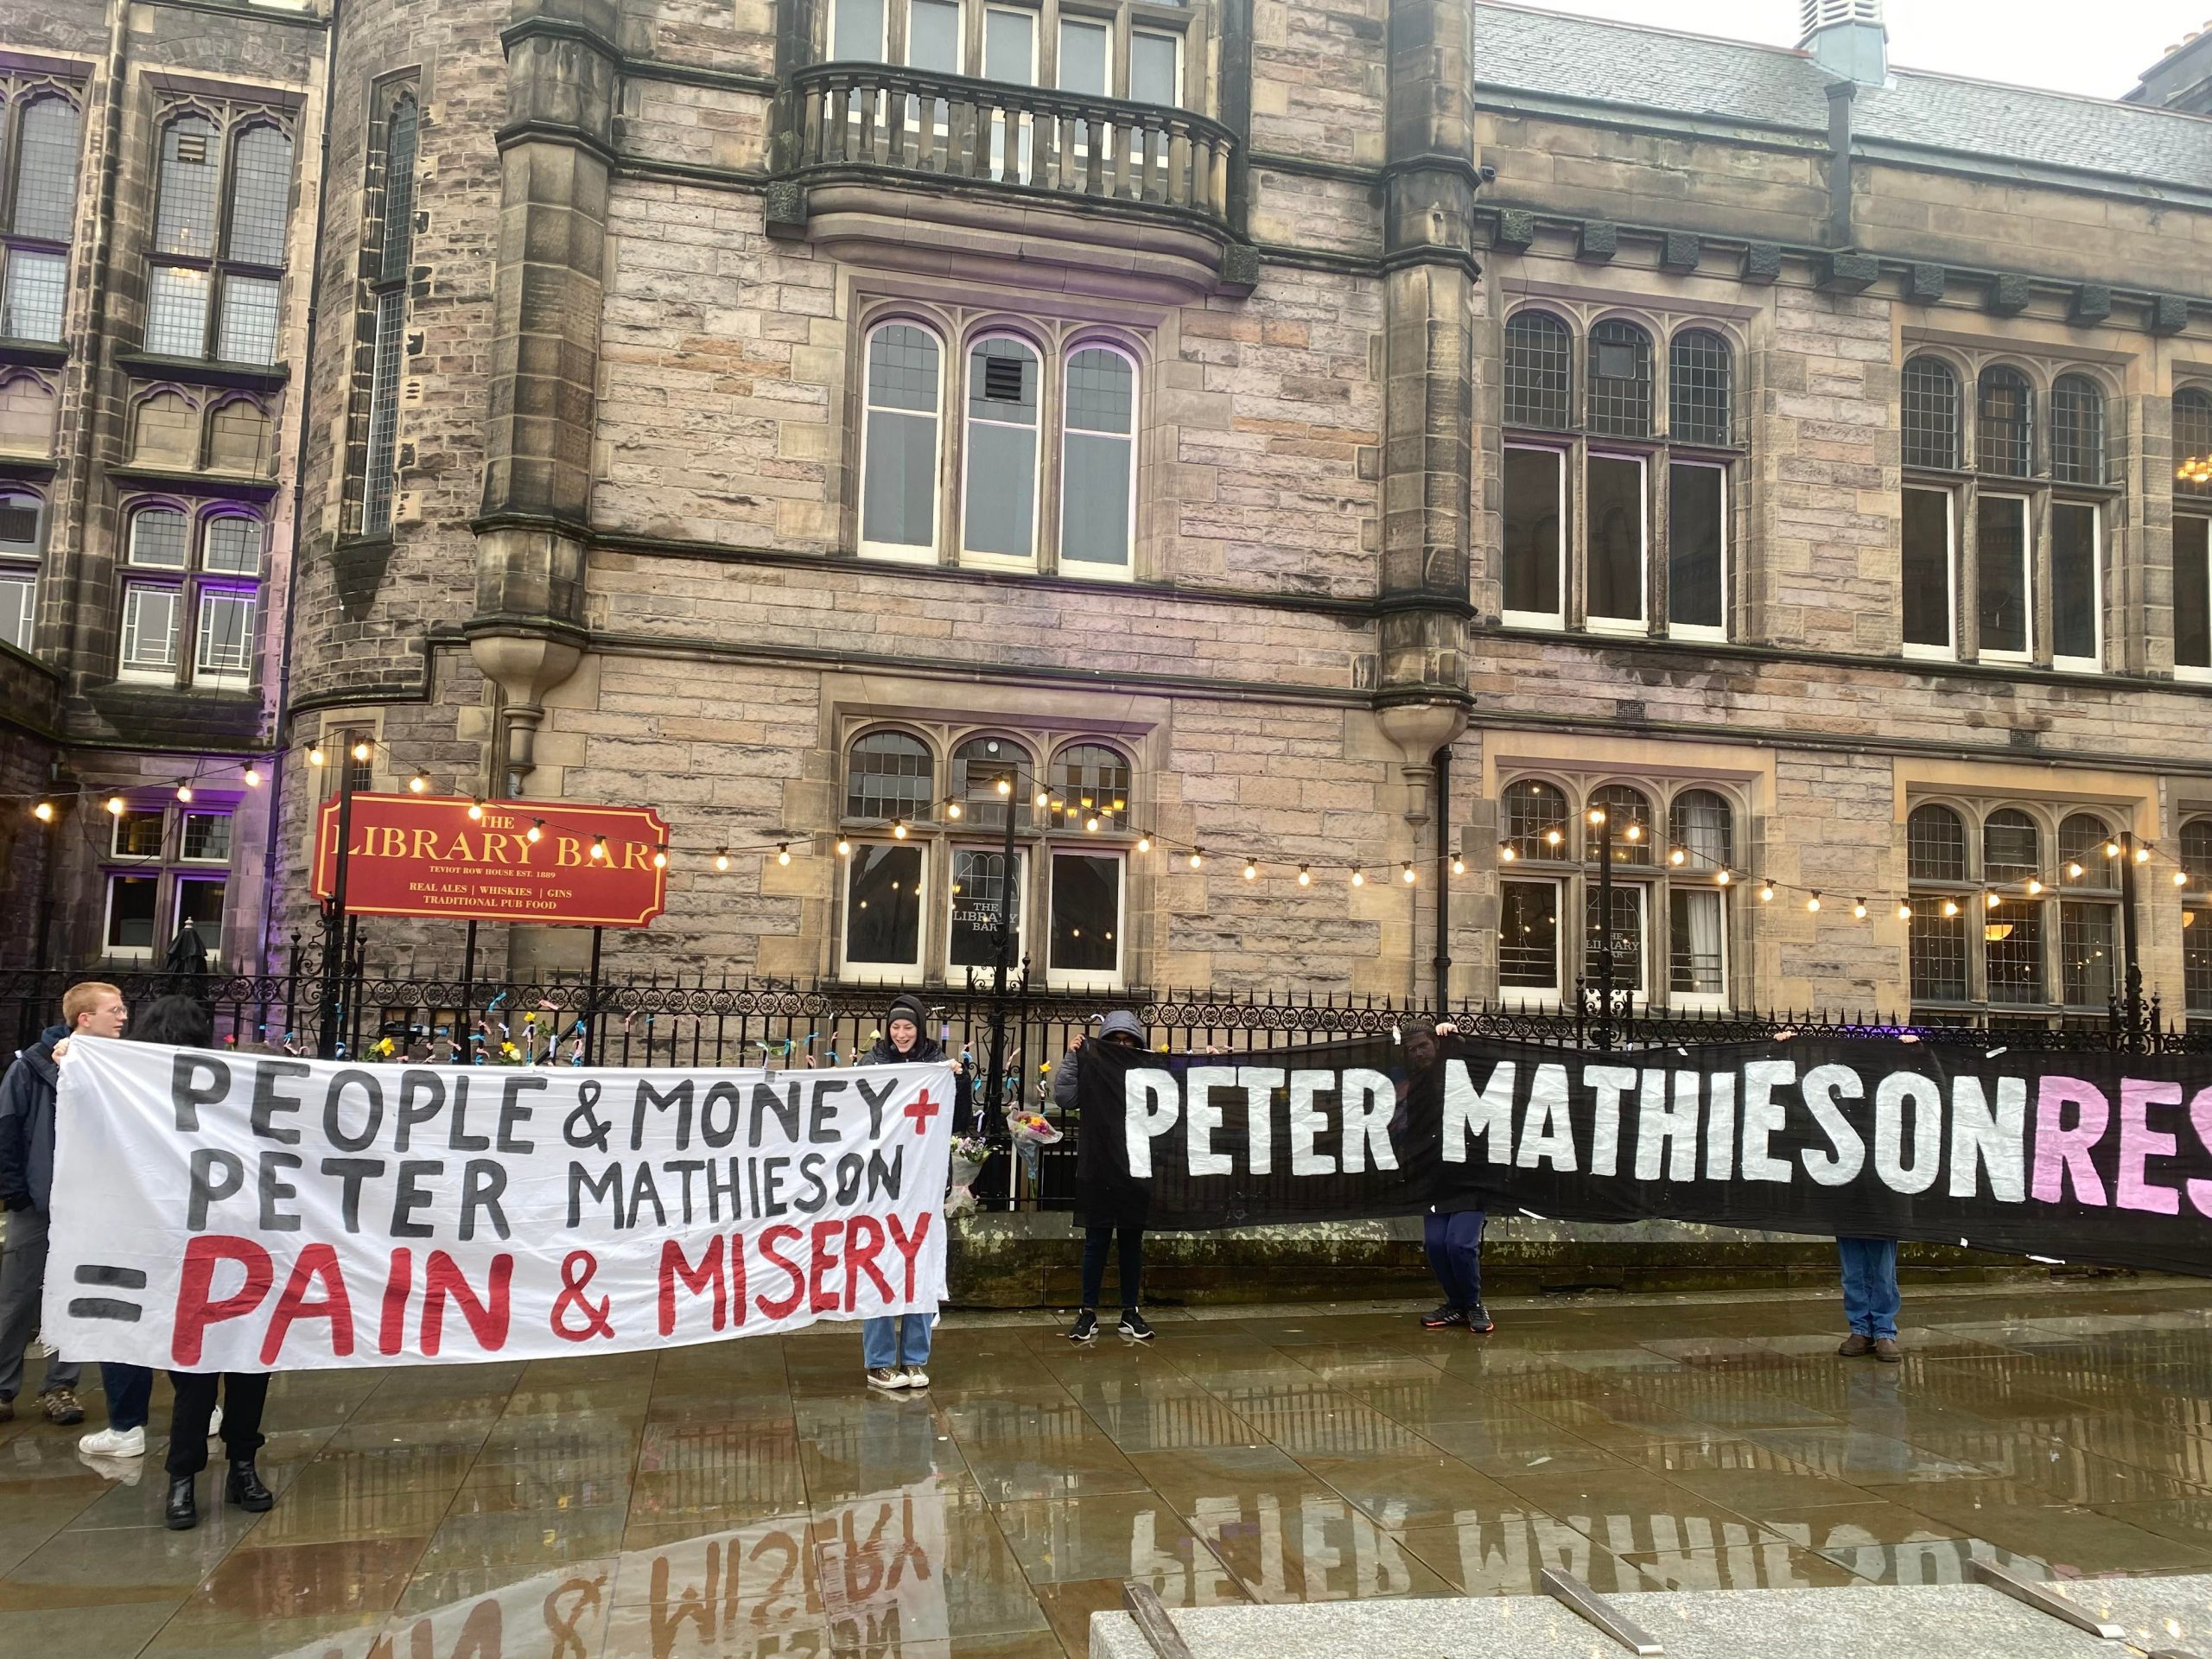 Several banners criticising University of Edinburgh principal and vice-chancellor Peter Mathieson in front of a brick, old students' union building